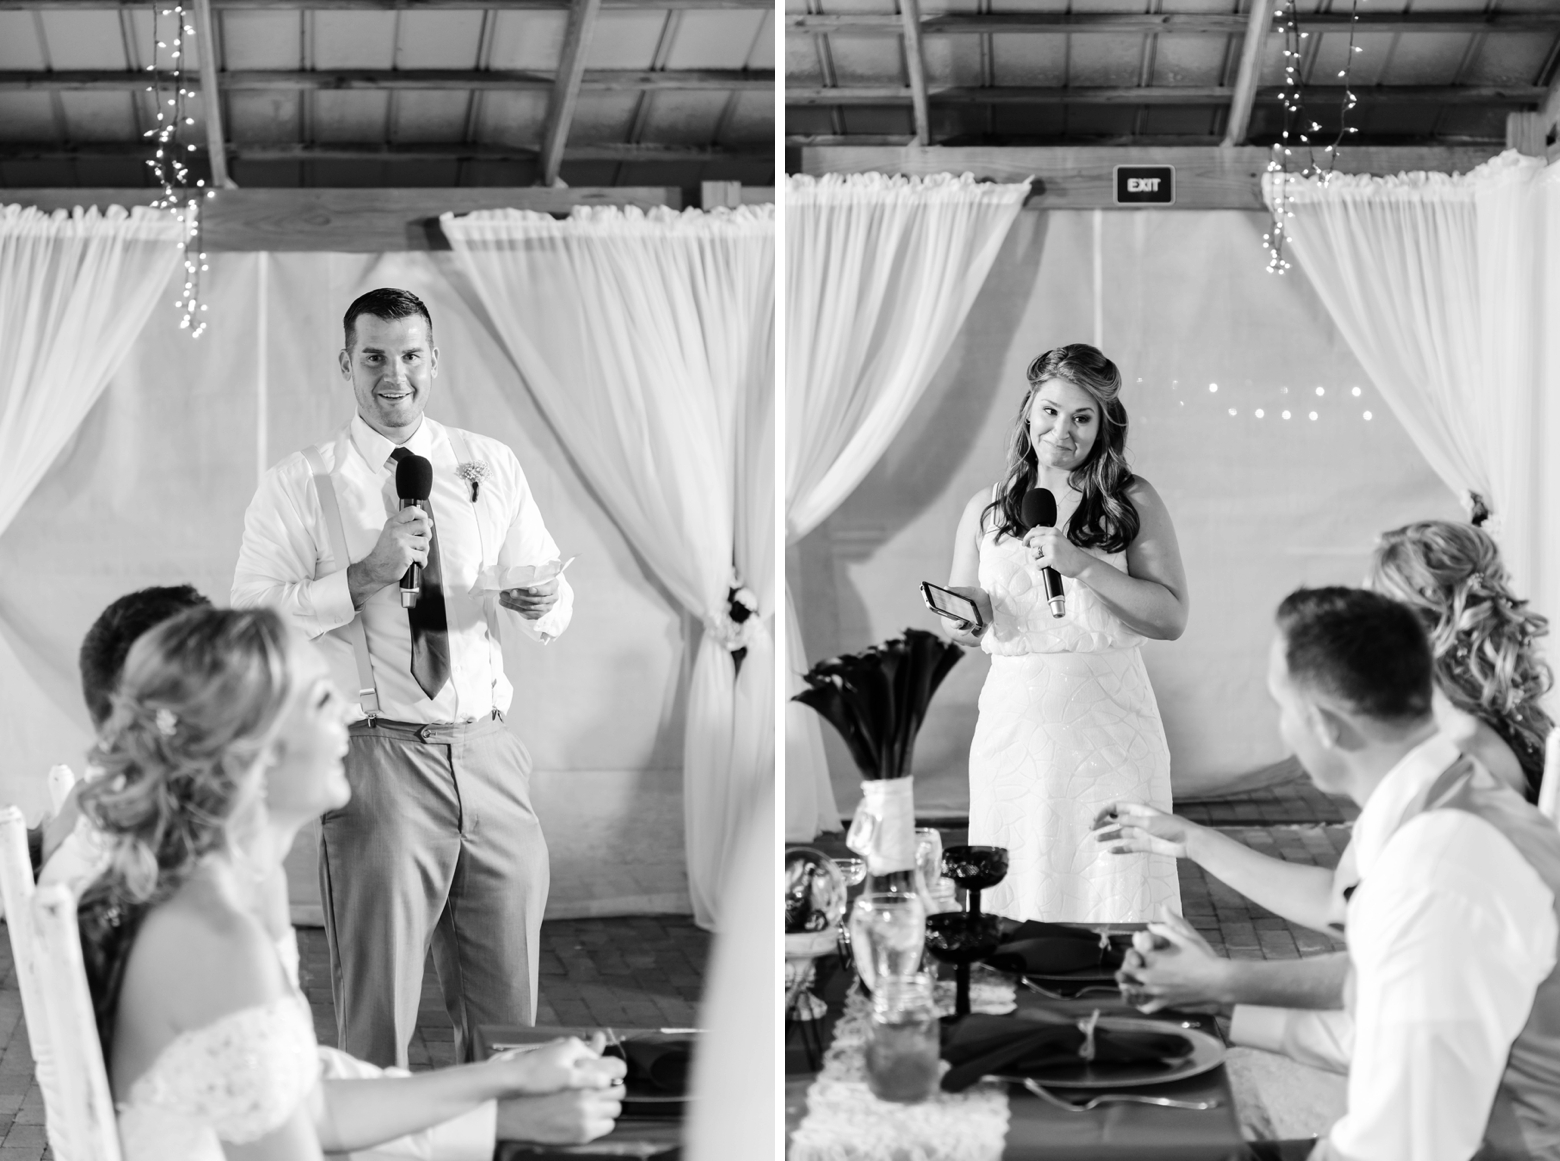 The Maid of Honor and the Best Man give speeches during the reception